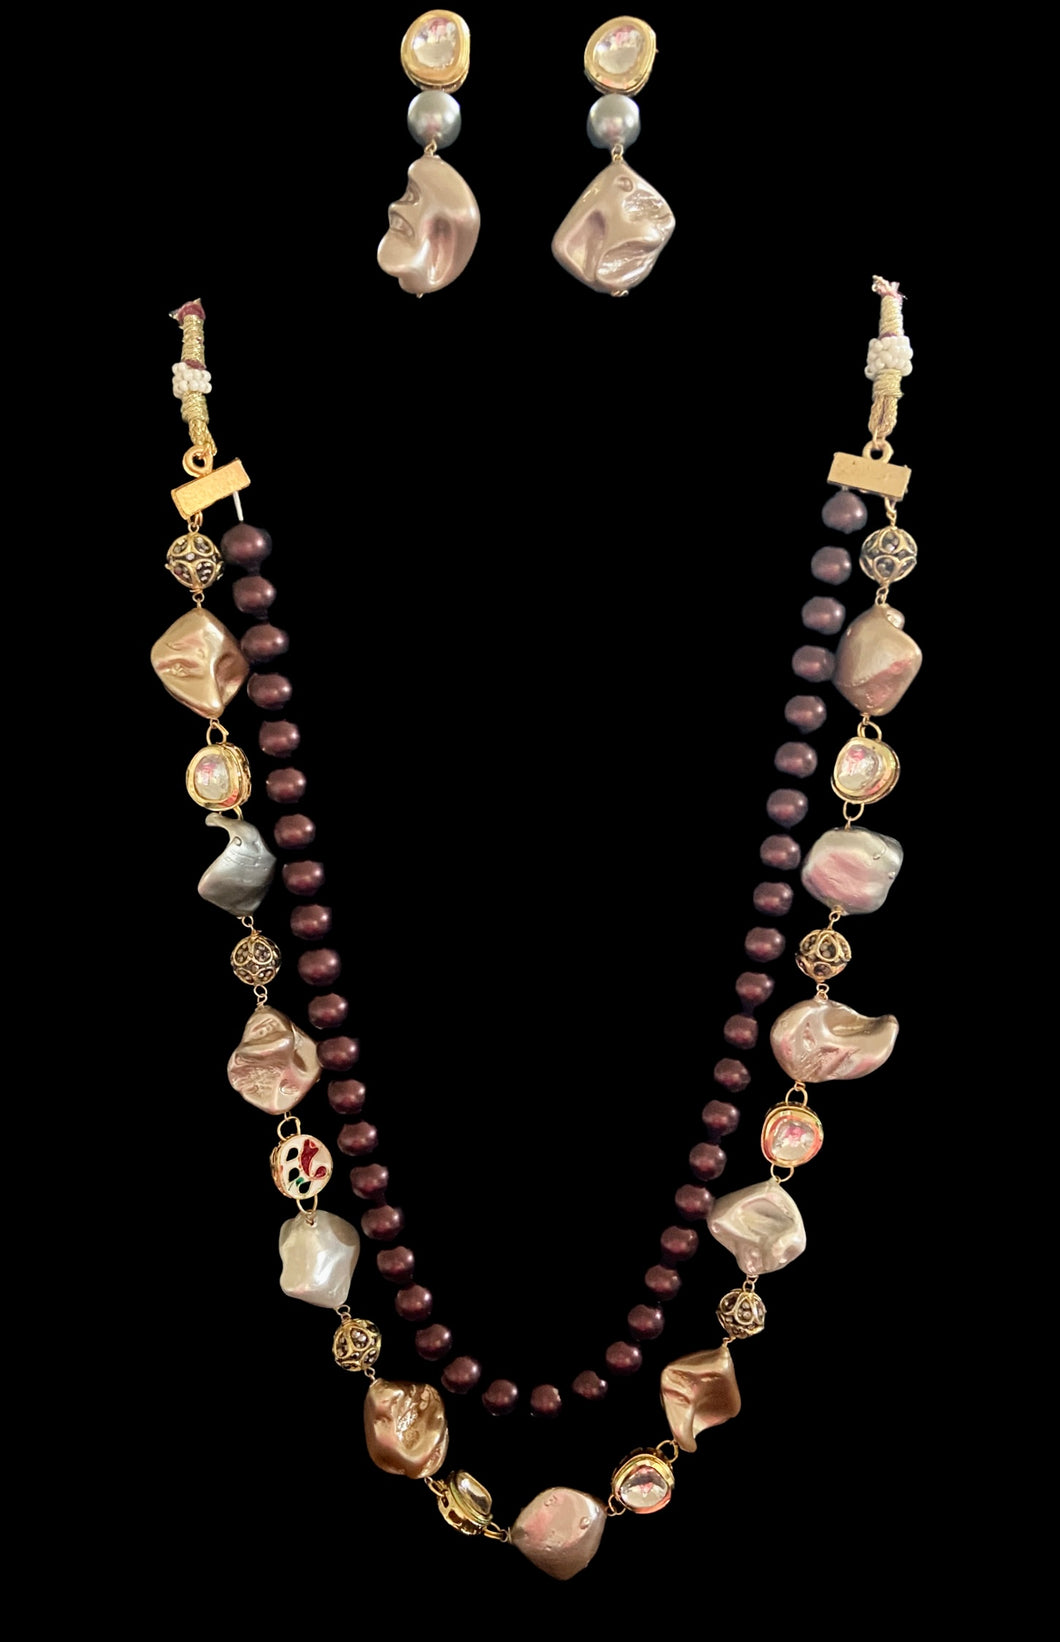 Agate stone necklace set